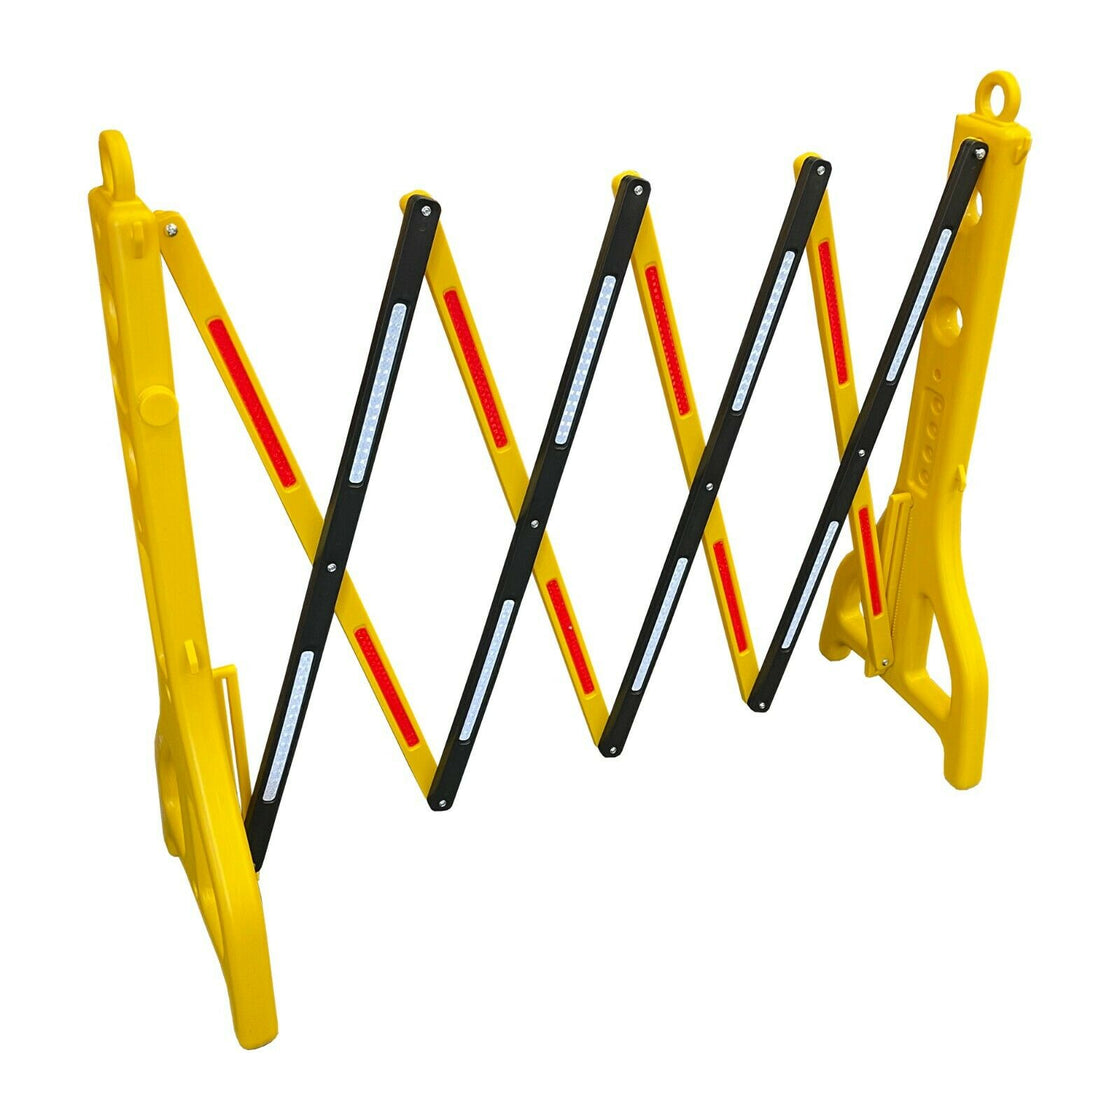 HIGH QUALITY PLASTIC FOLDING SAFETY BARRIER - PGS Supplies 21 Ltd